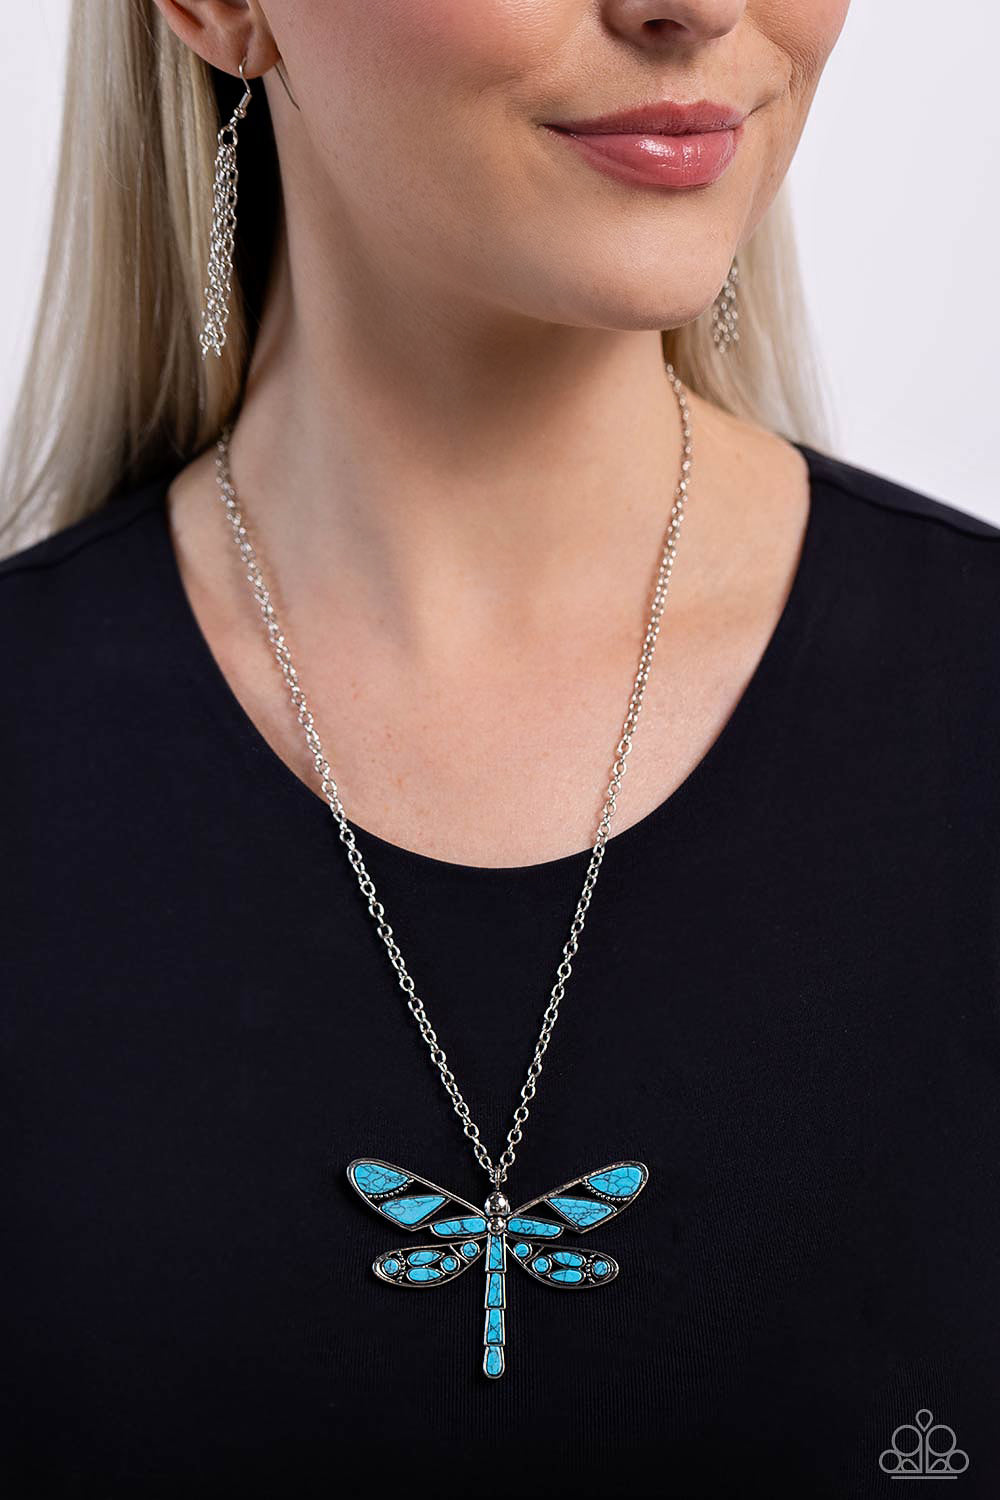 Paparazzi FLYING Low - Blue - Dragon Fly - Necklace & Earrings